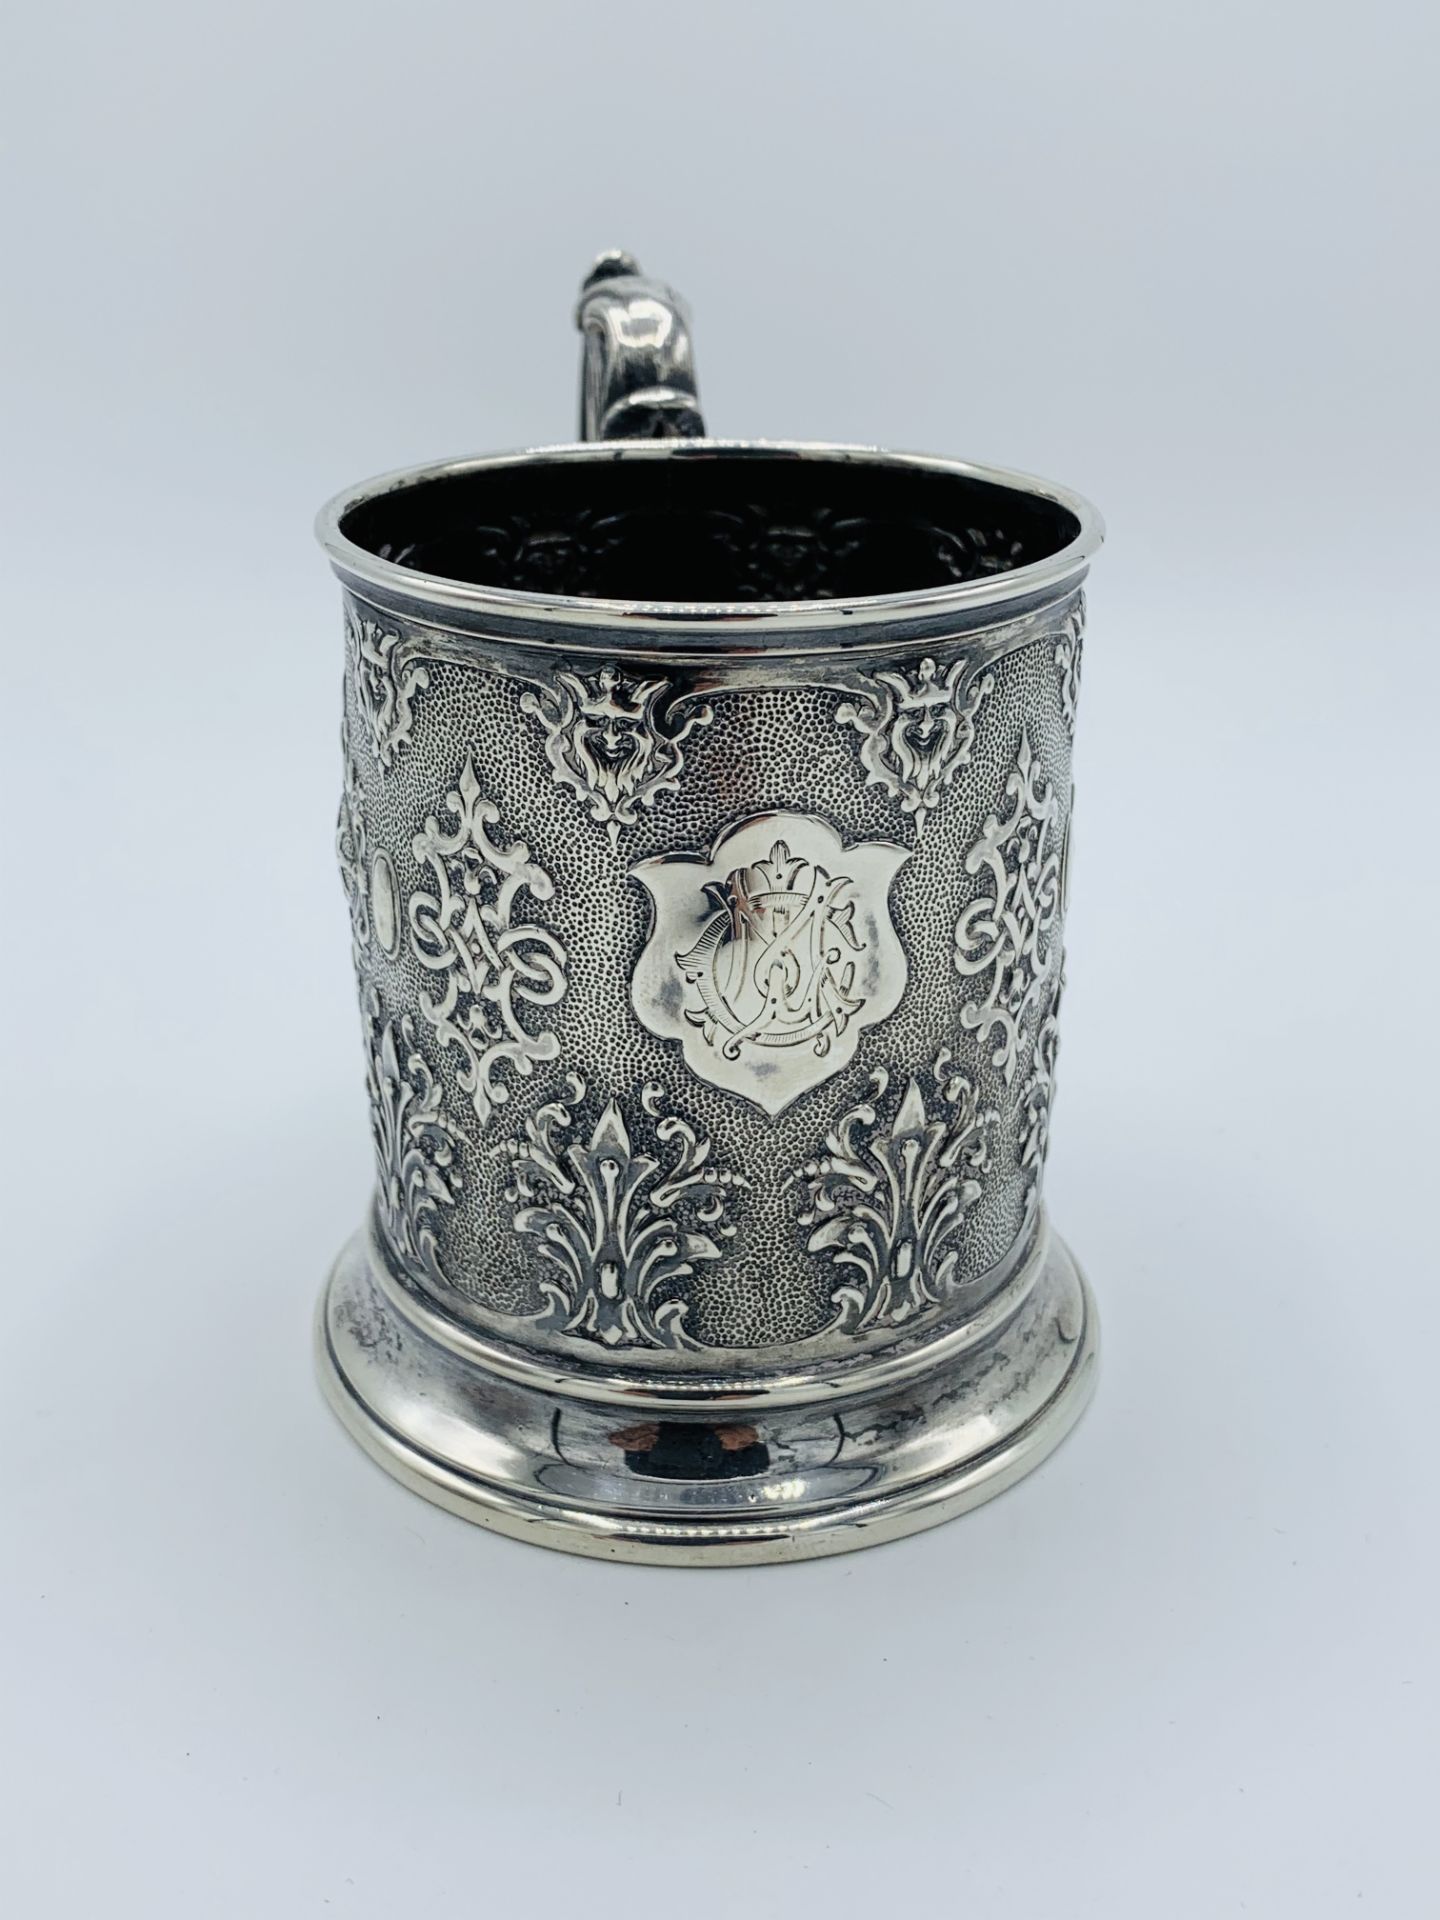 Small heavily repousse decorated silver tankard by Robert Hennell III - Image 2 of 3